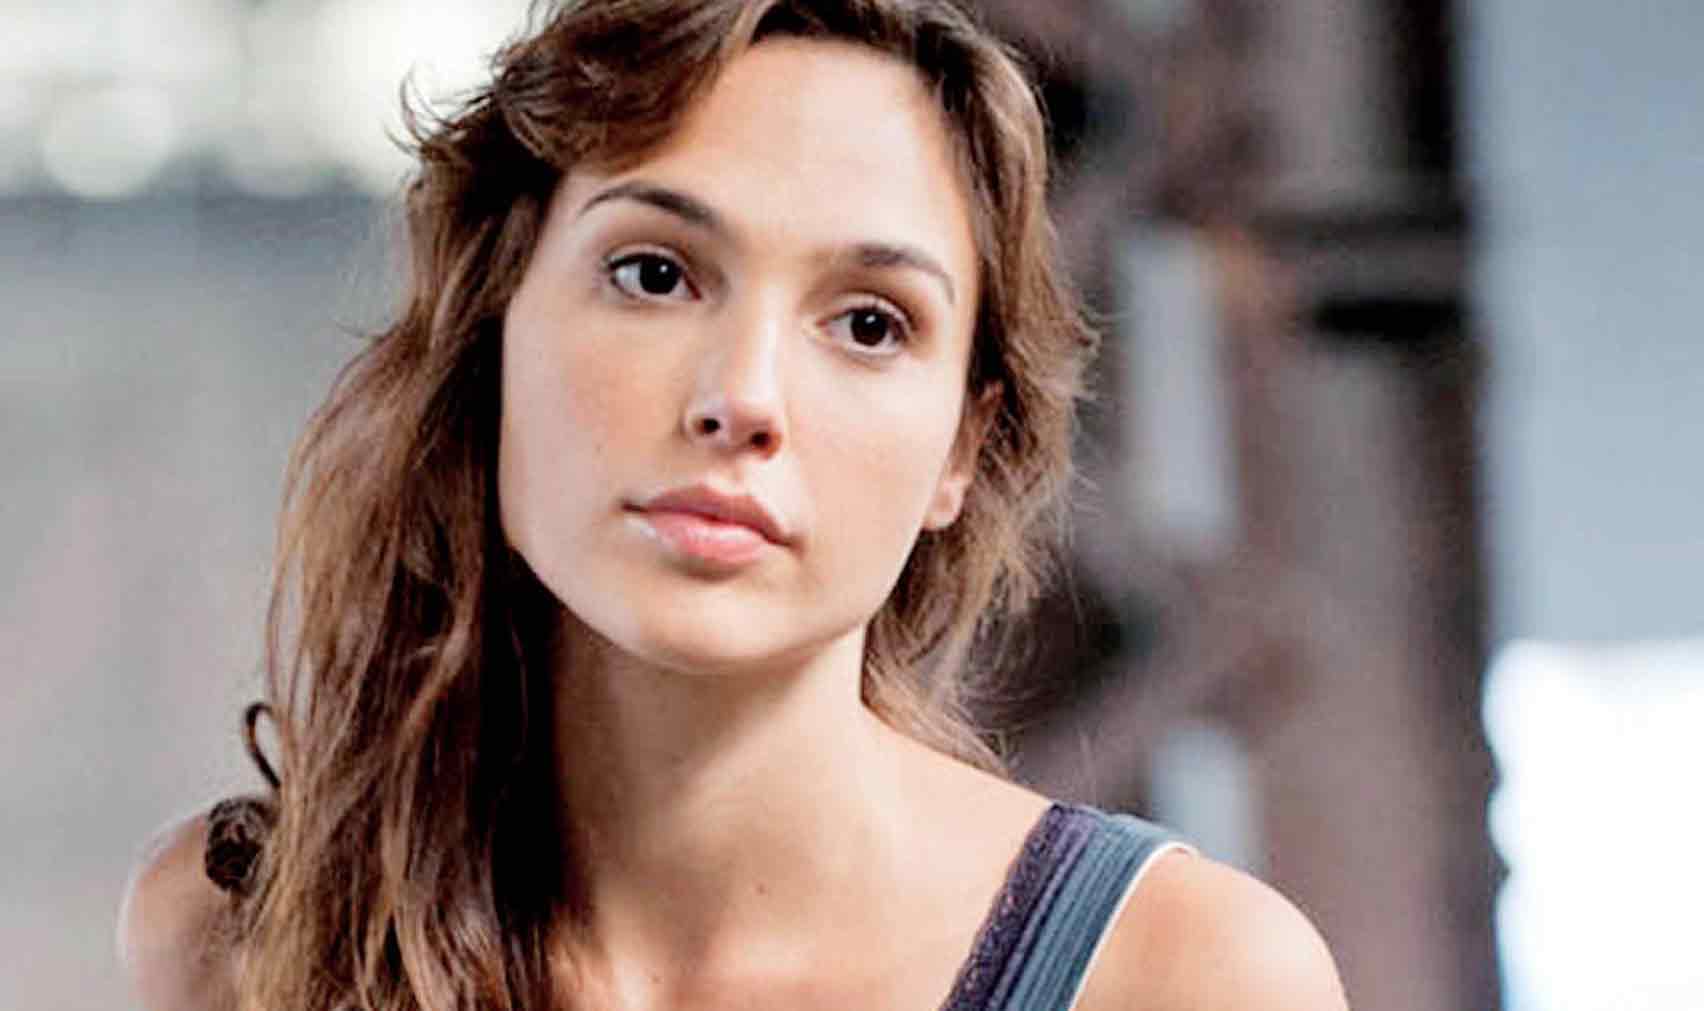 Gal Gadot Biography With Personal Life Married And Affair A Collection Of Facts Affair Married Spouse Salary Height Weight Net Worth Bio Career Children Boyfriend Husband Dating Before the israeli premiere of this film on june 1, the azrieli center in tel aviv was lit up to honor gadot. gal gadot biography with personal